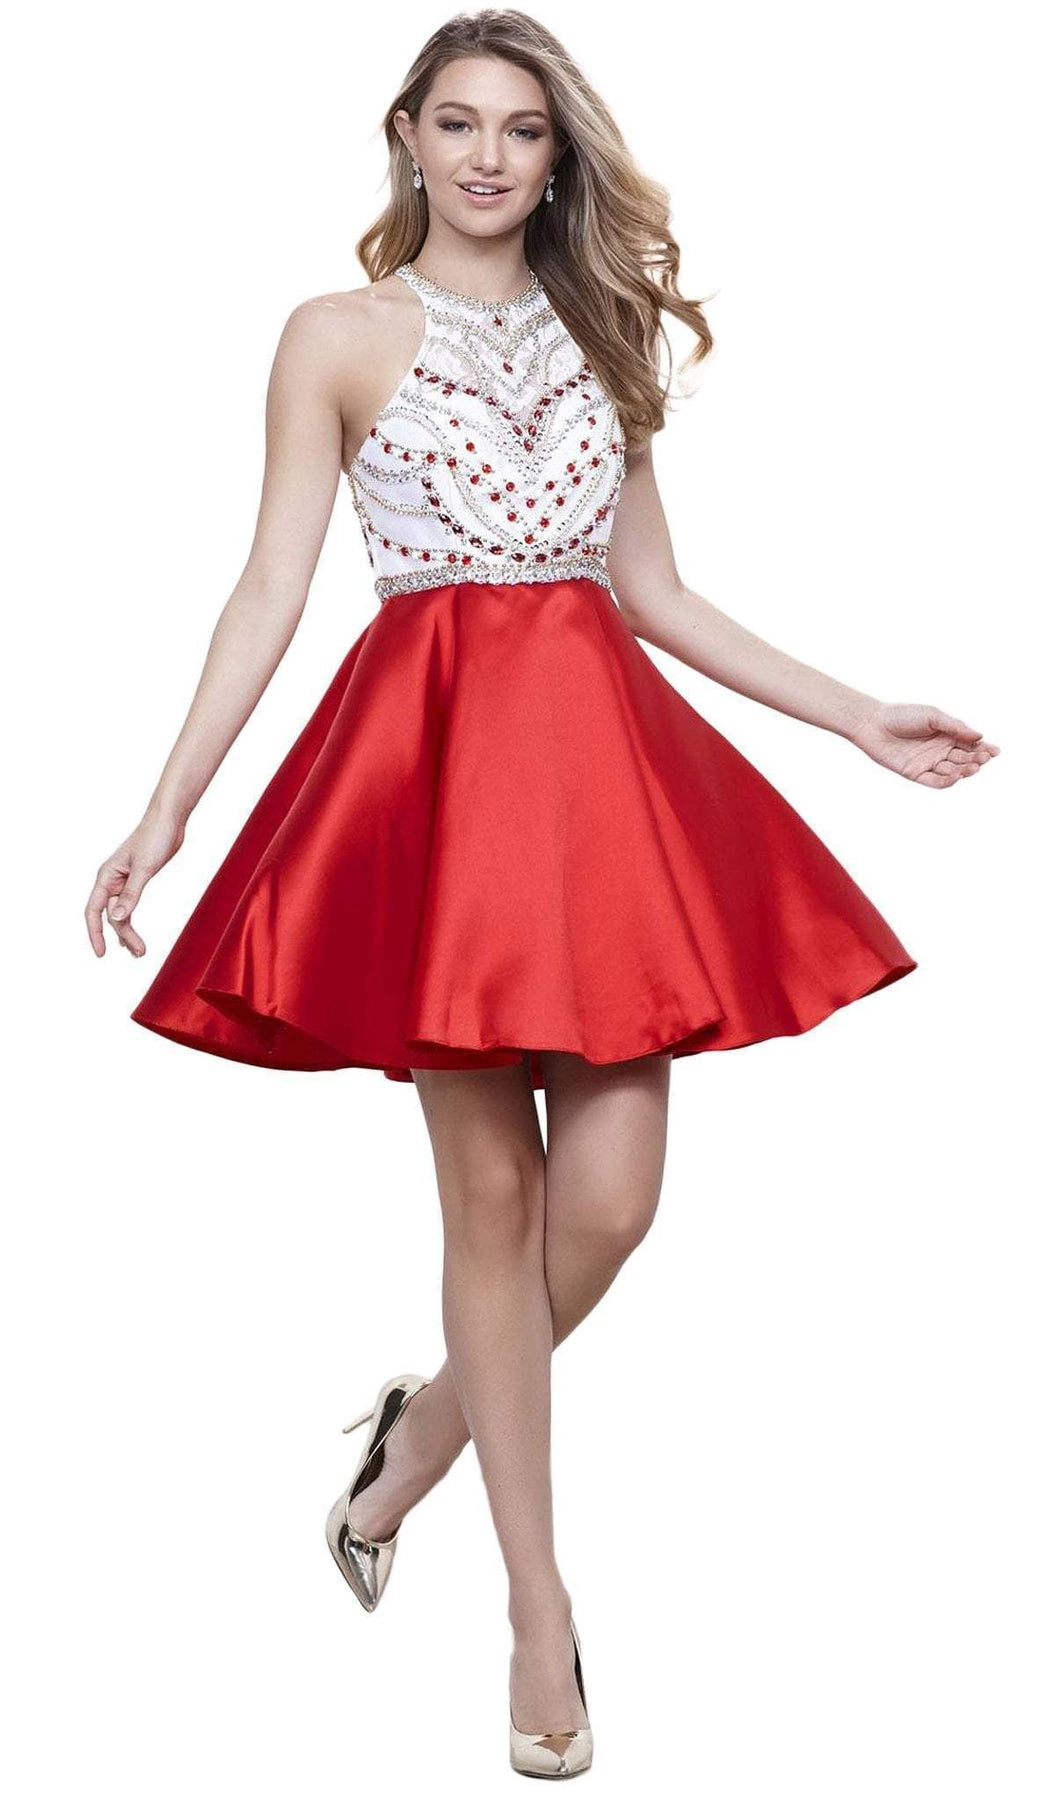 Nox Anabel - 6247 Beaded High Halter Illusion Satin Short Cocktail Dress Special Occasion Dress XS / Red & White